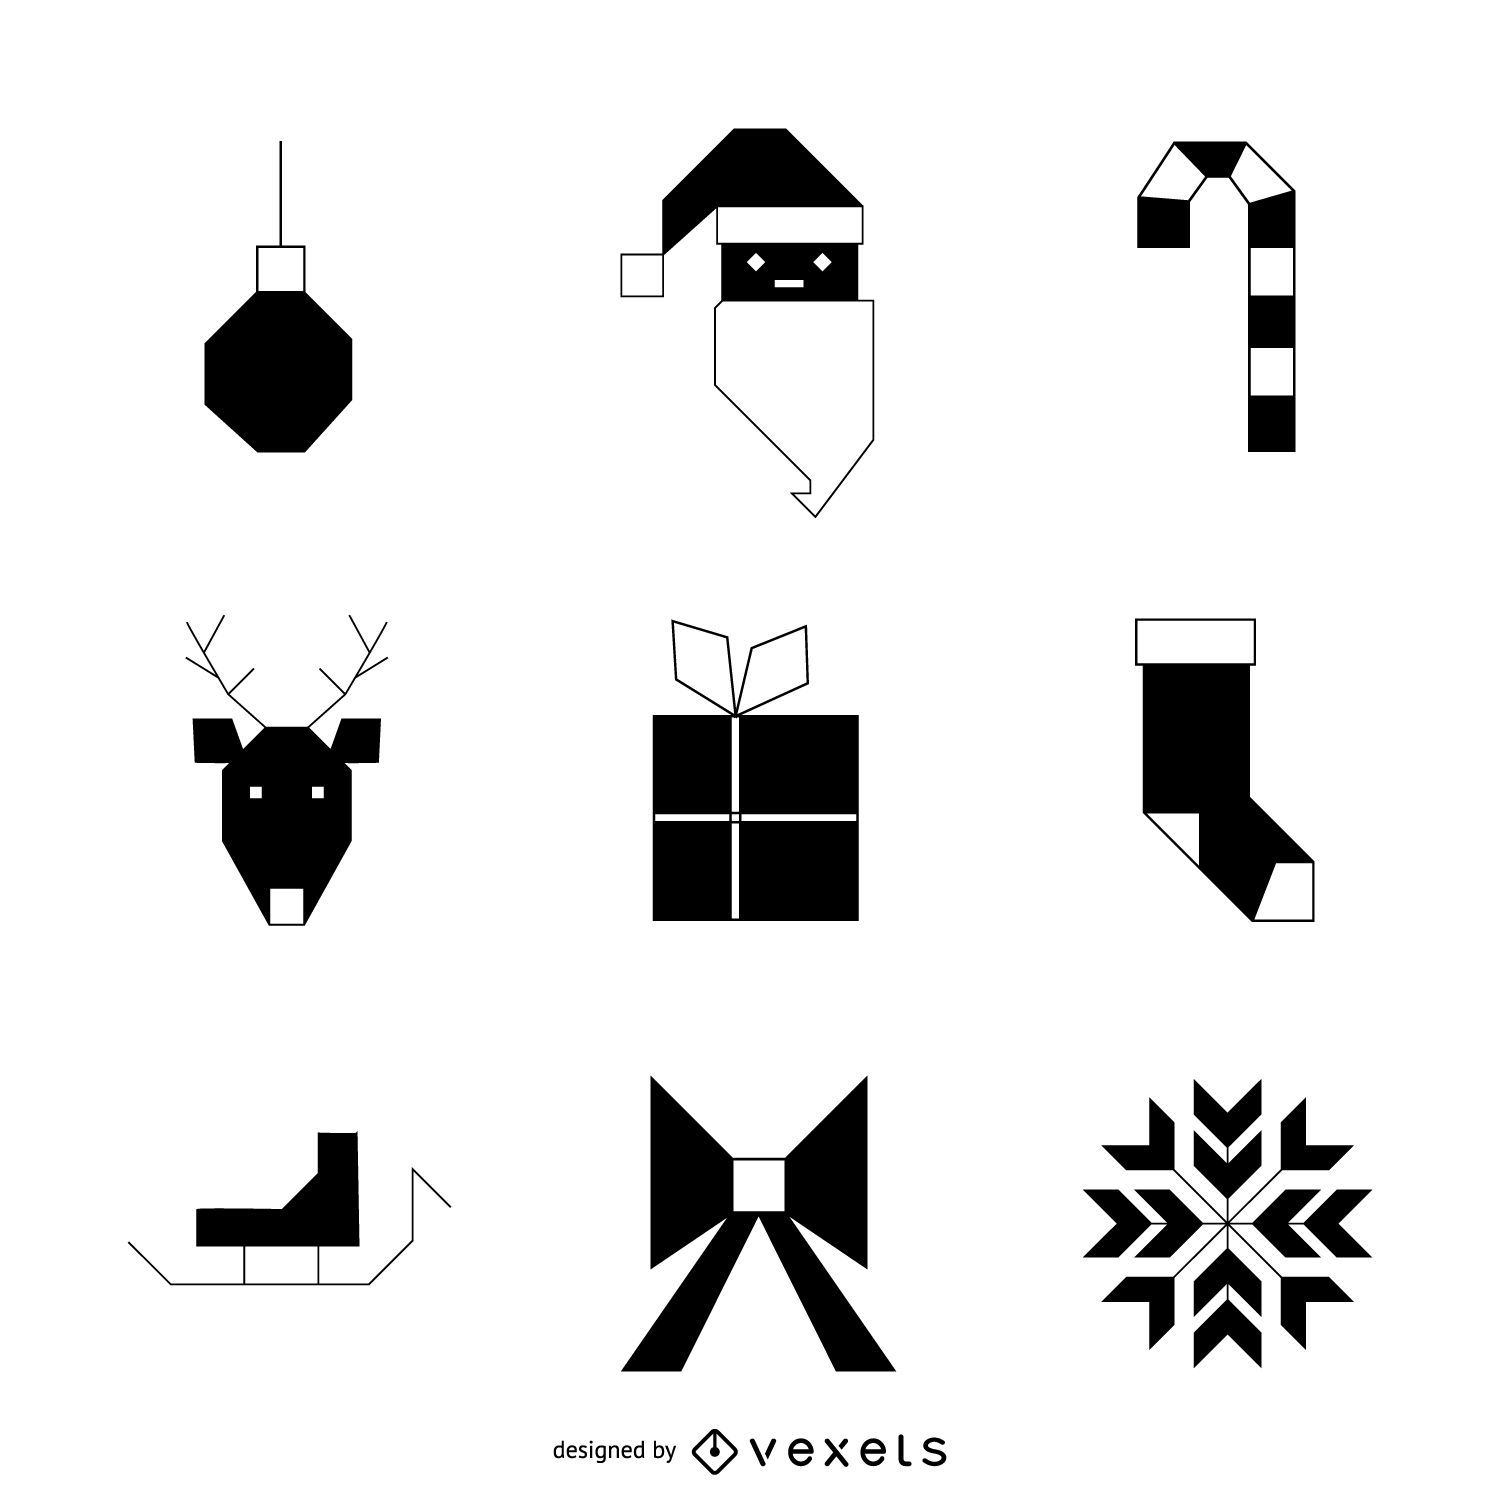 Christmas B Vector Art, Icons, and Graphics for Free Download